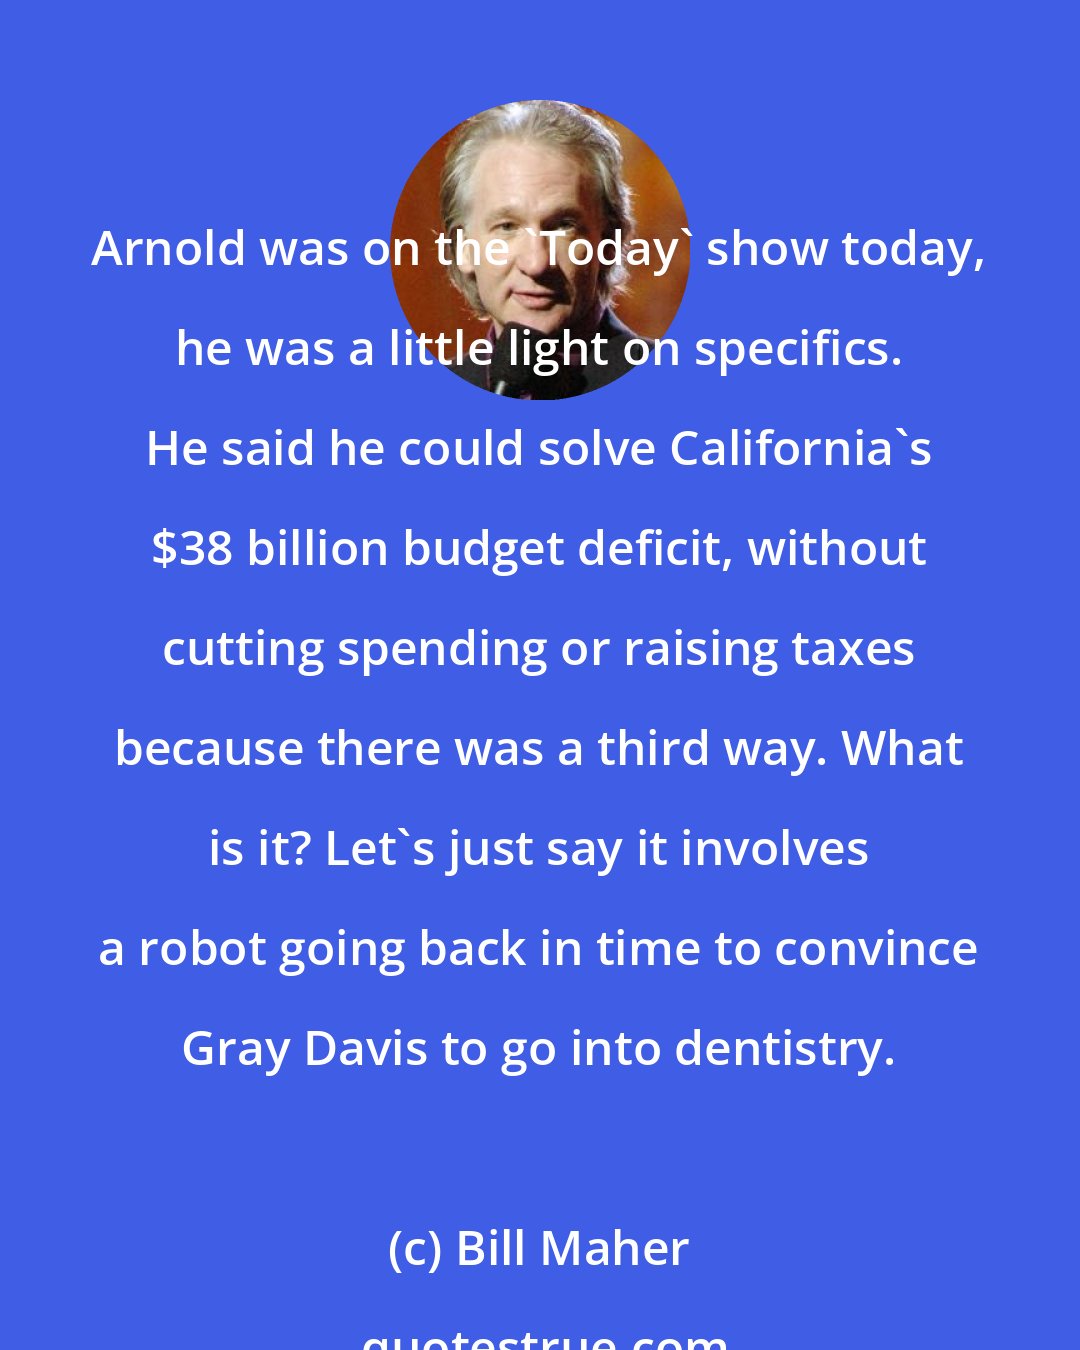 Bill Maher: Arnold was on the 'Today' show today, he was a little light on specifics. He said he could solve California's $38 billion budget deficit, without cutting spending or raising taxes because there was a third way. What is it? Let's just say it involves a robot going back in time to convince Gray Davis to go into dentistry.